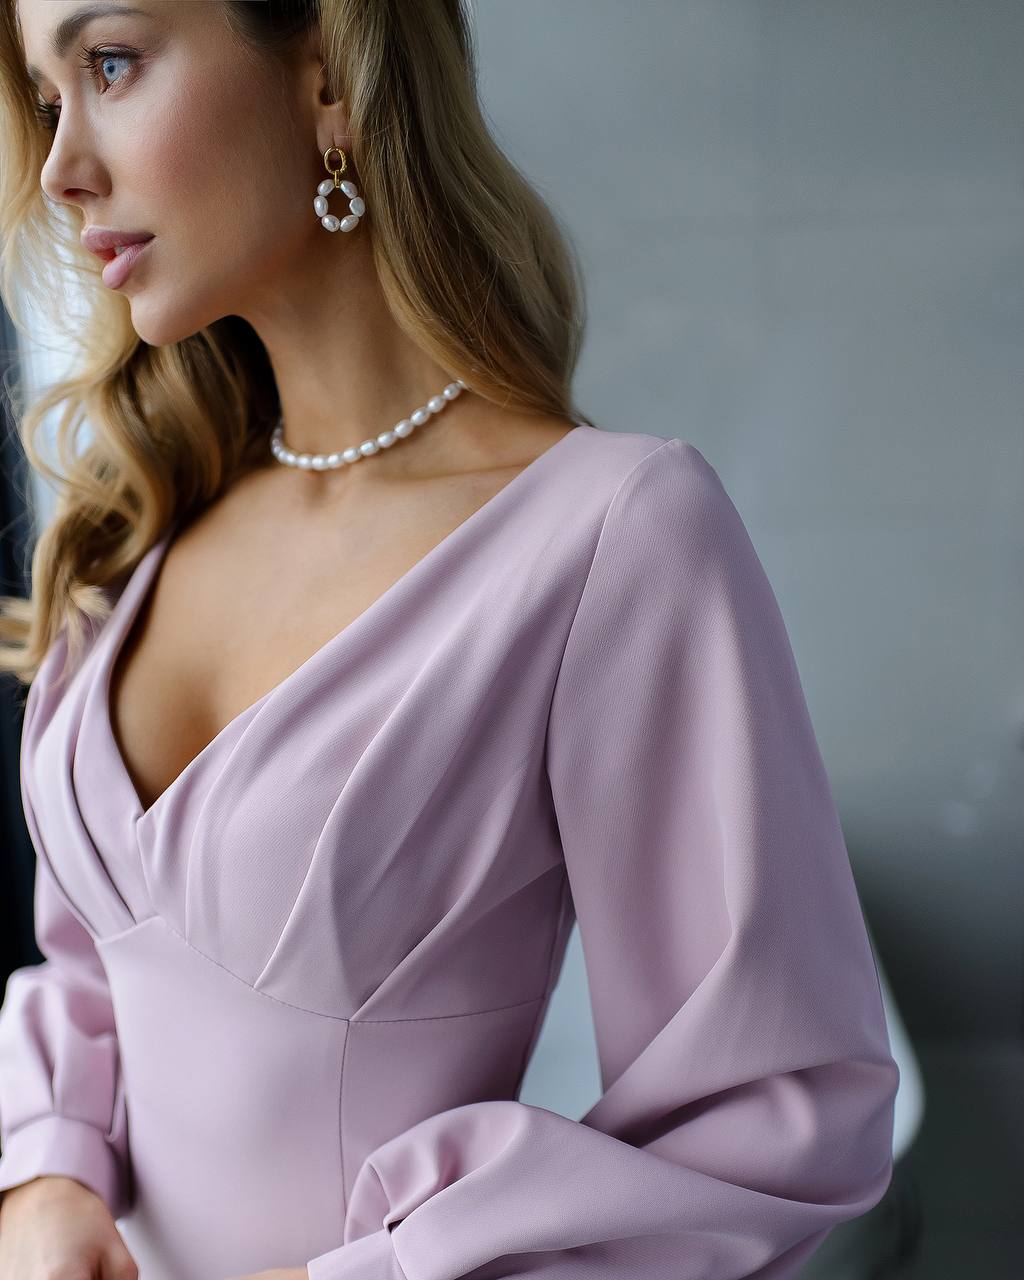 a woman in a pink dress with a pearl necklace